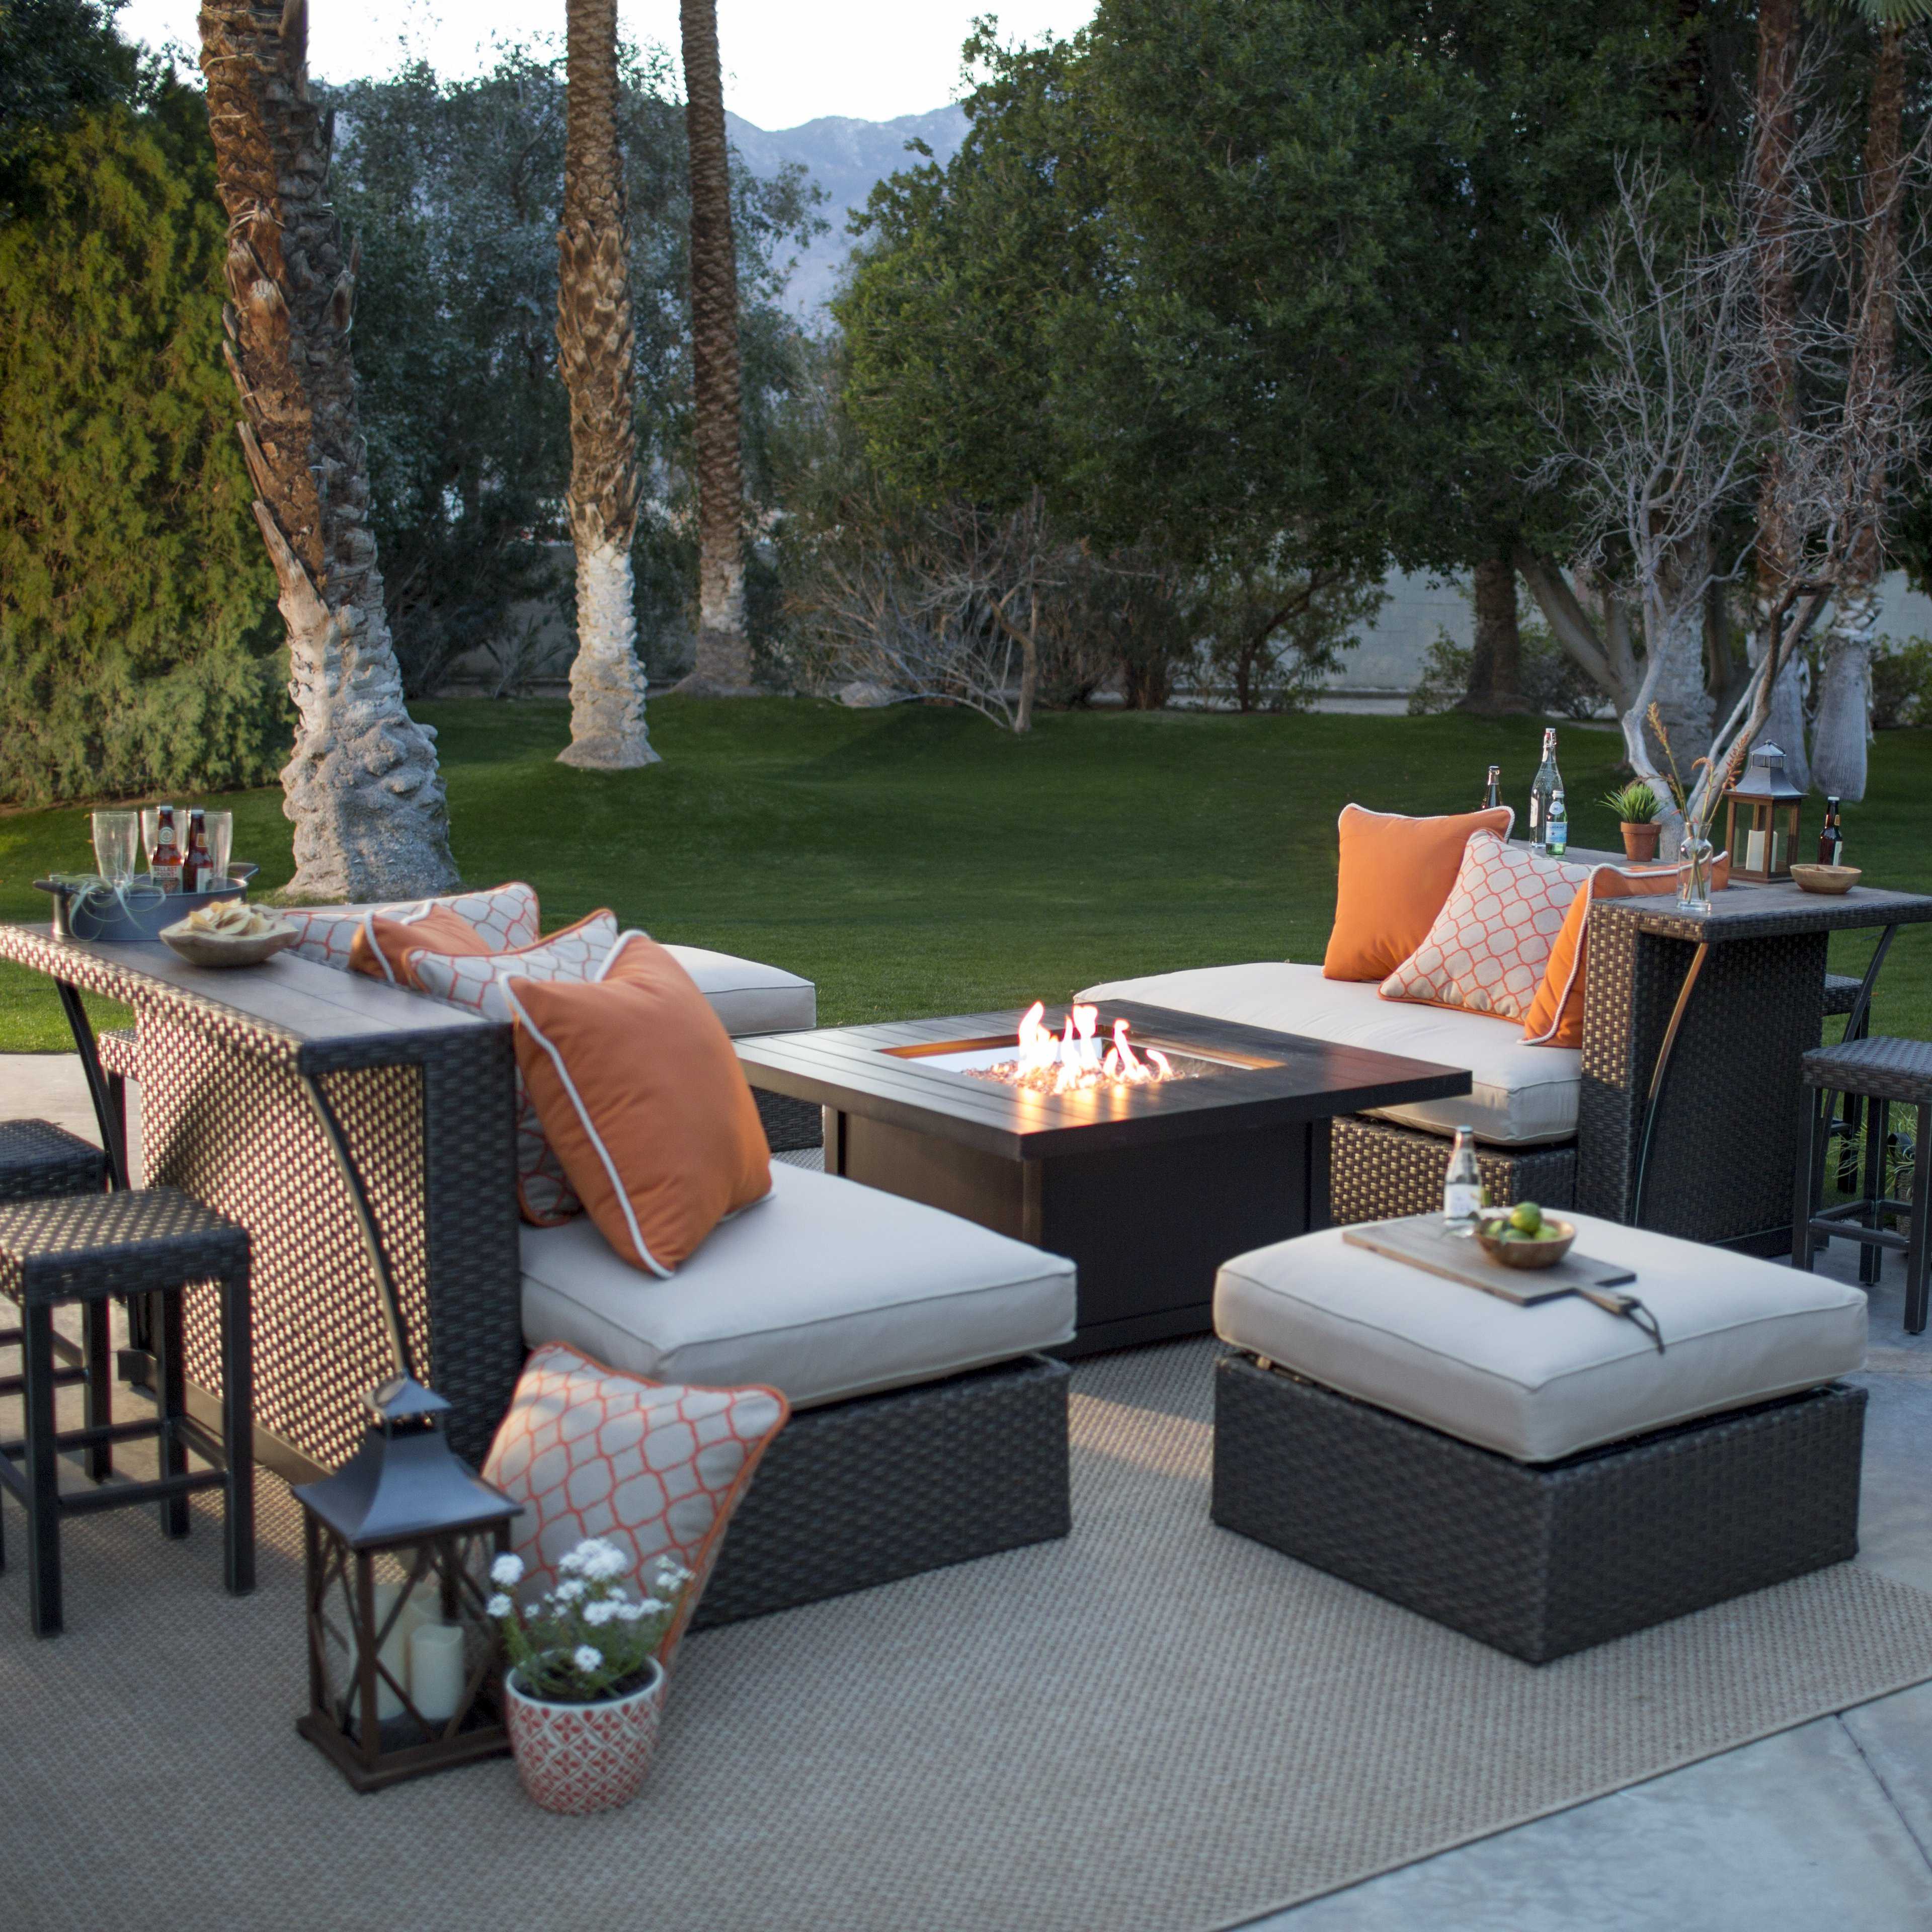 Patio Sets incredible outdoor patio set with fire pit trends sets pictures furniture  table BVWWATJ